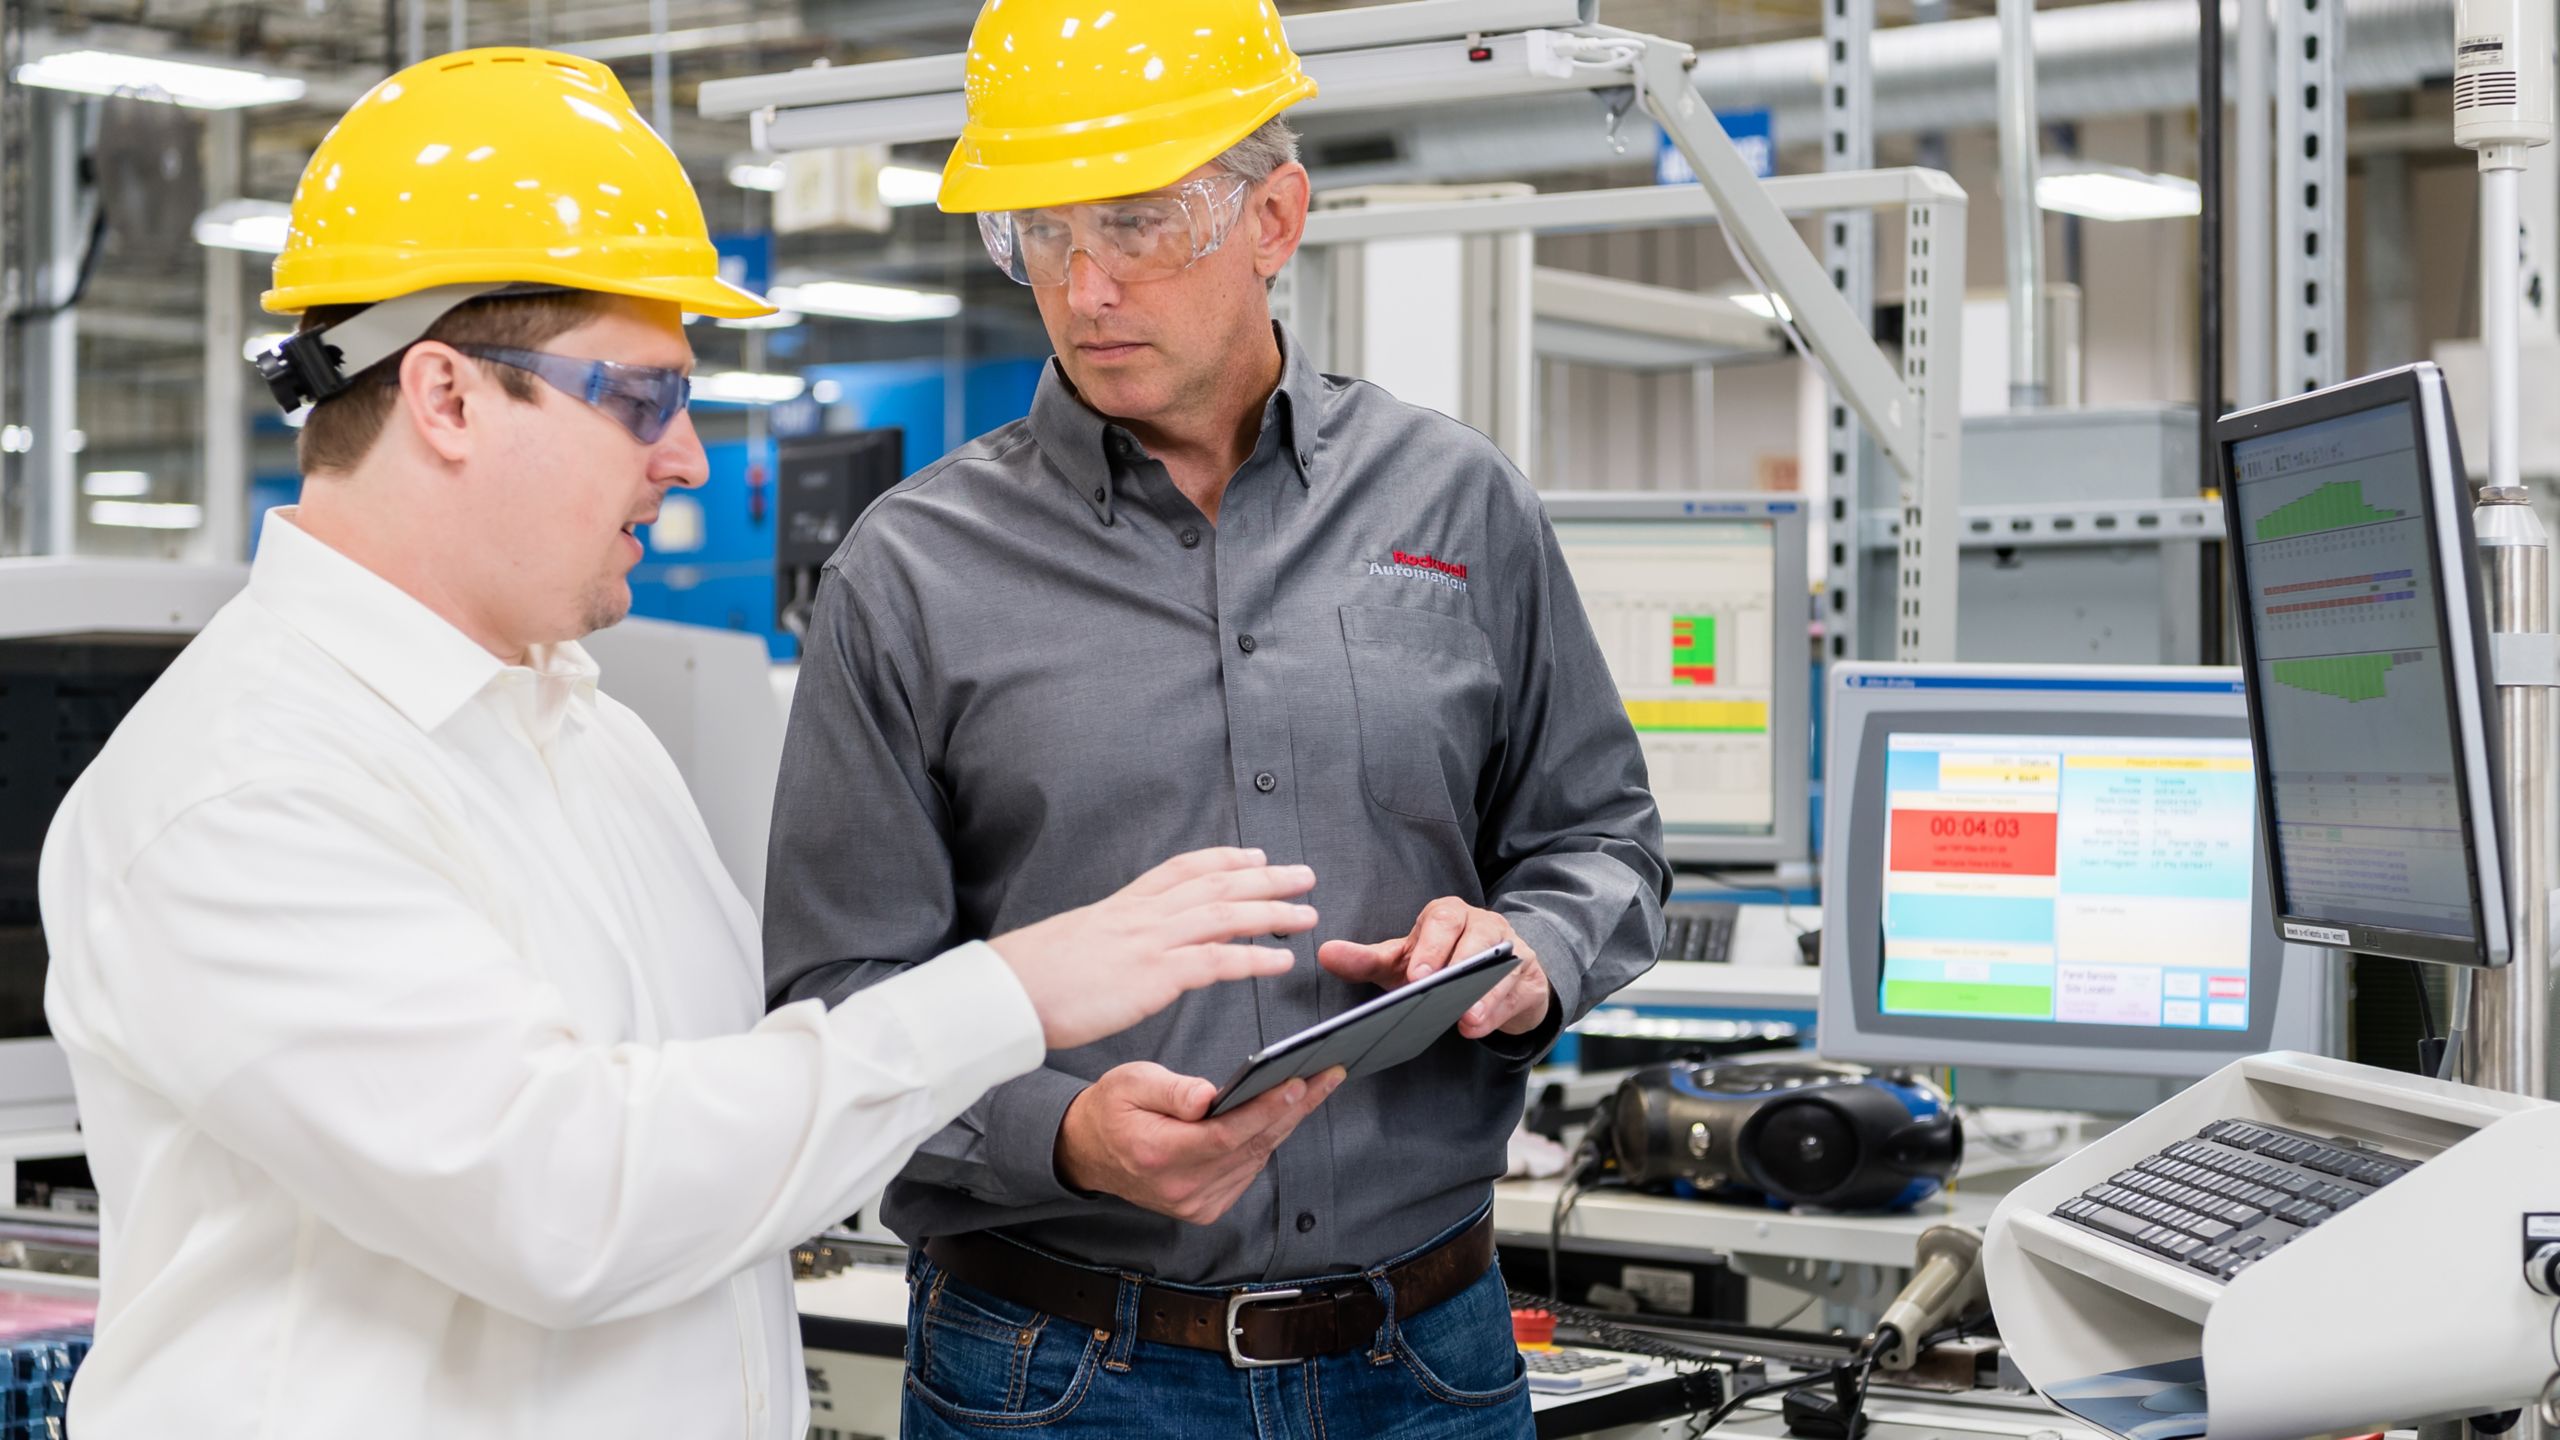 Machine Safety Services | Rockwell Automation